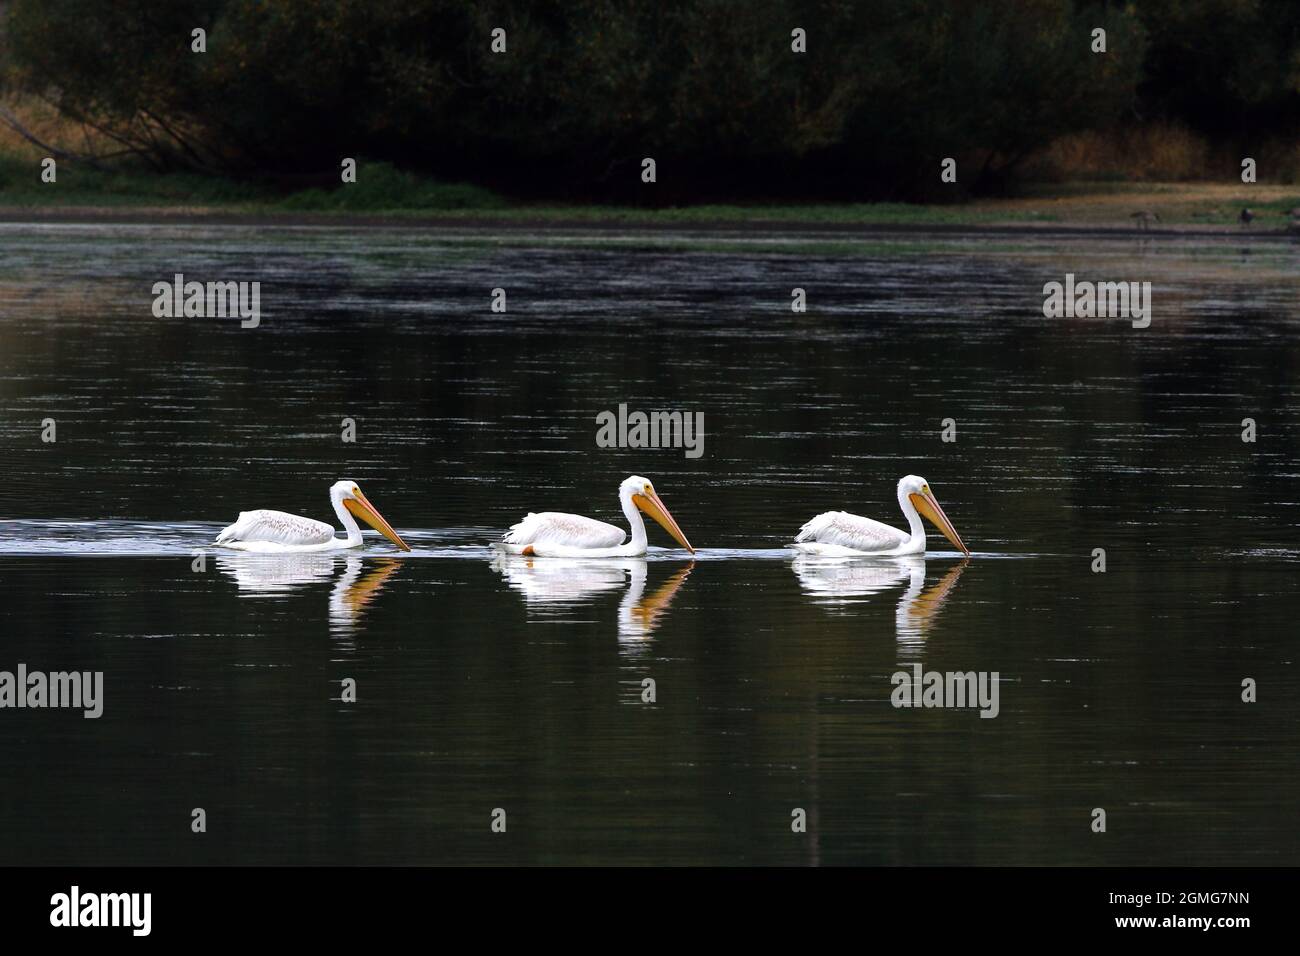 Three Whit Pelicans swimming lazily on the lake showing identical reflections Stock Photo